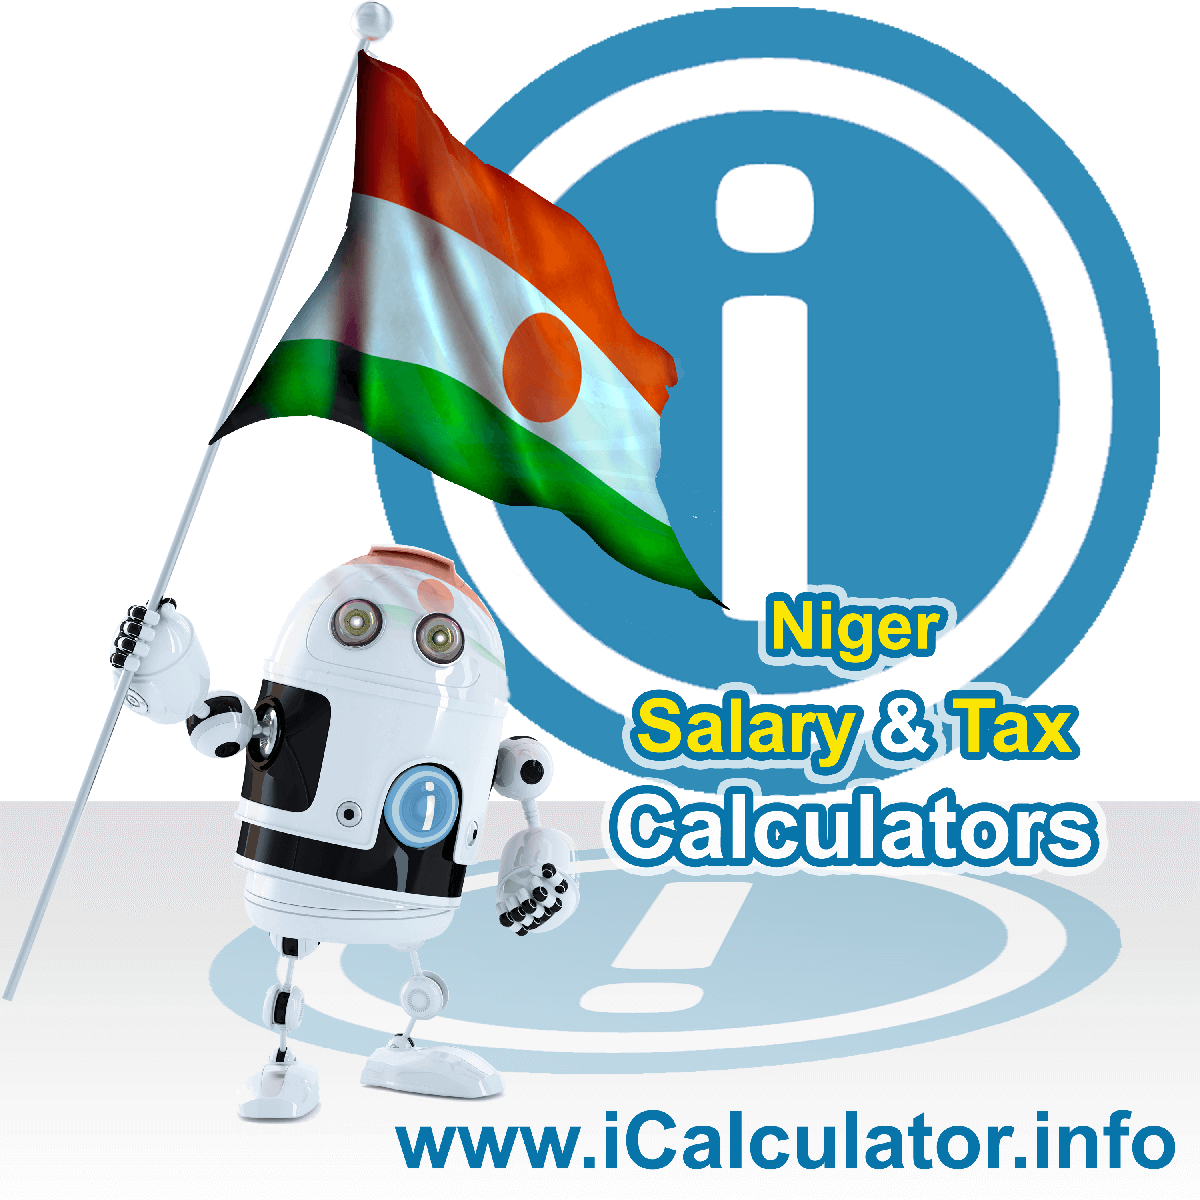 Niger Tax Calculator. This image shows the Niger flag and information relating to the tax formula for the Niger Salary Calculator